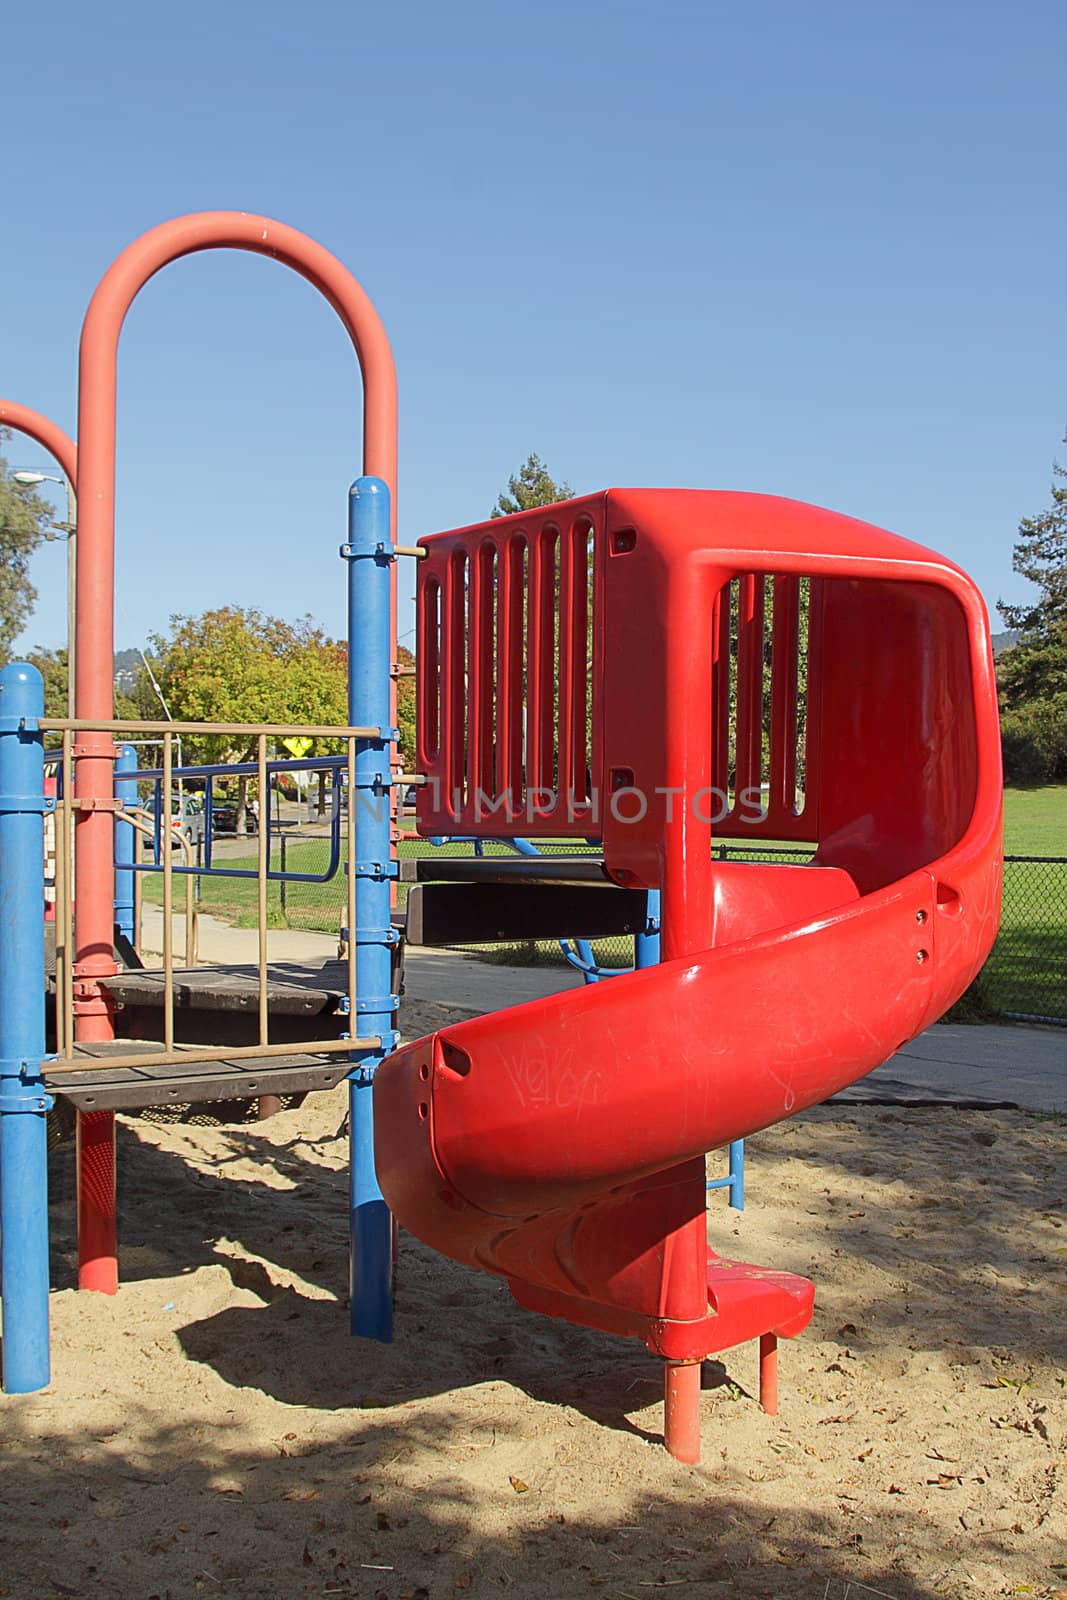 Children's playground with red slide on sunny day